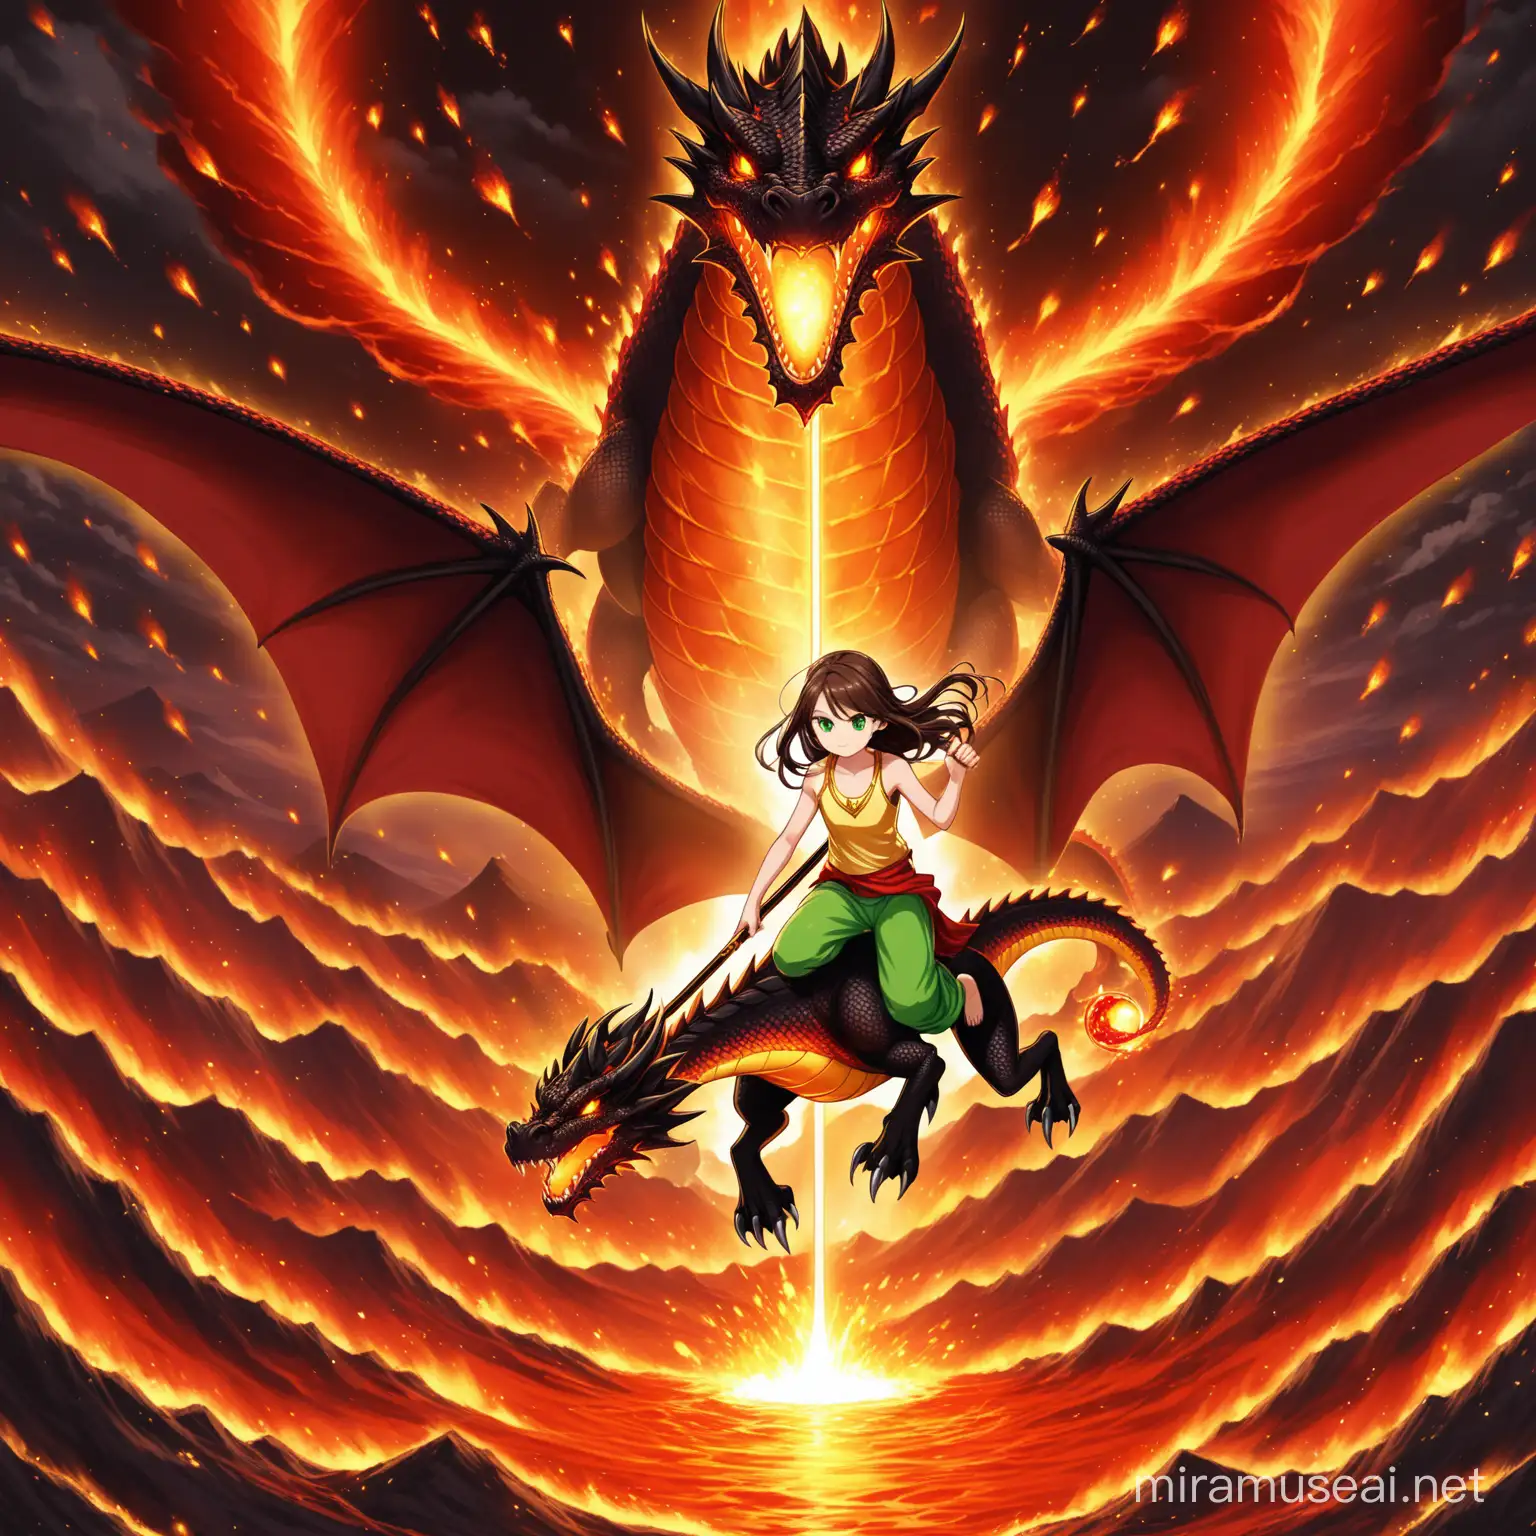 Young Girl Riding Majestic Dragon Over Volcano